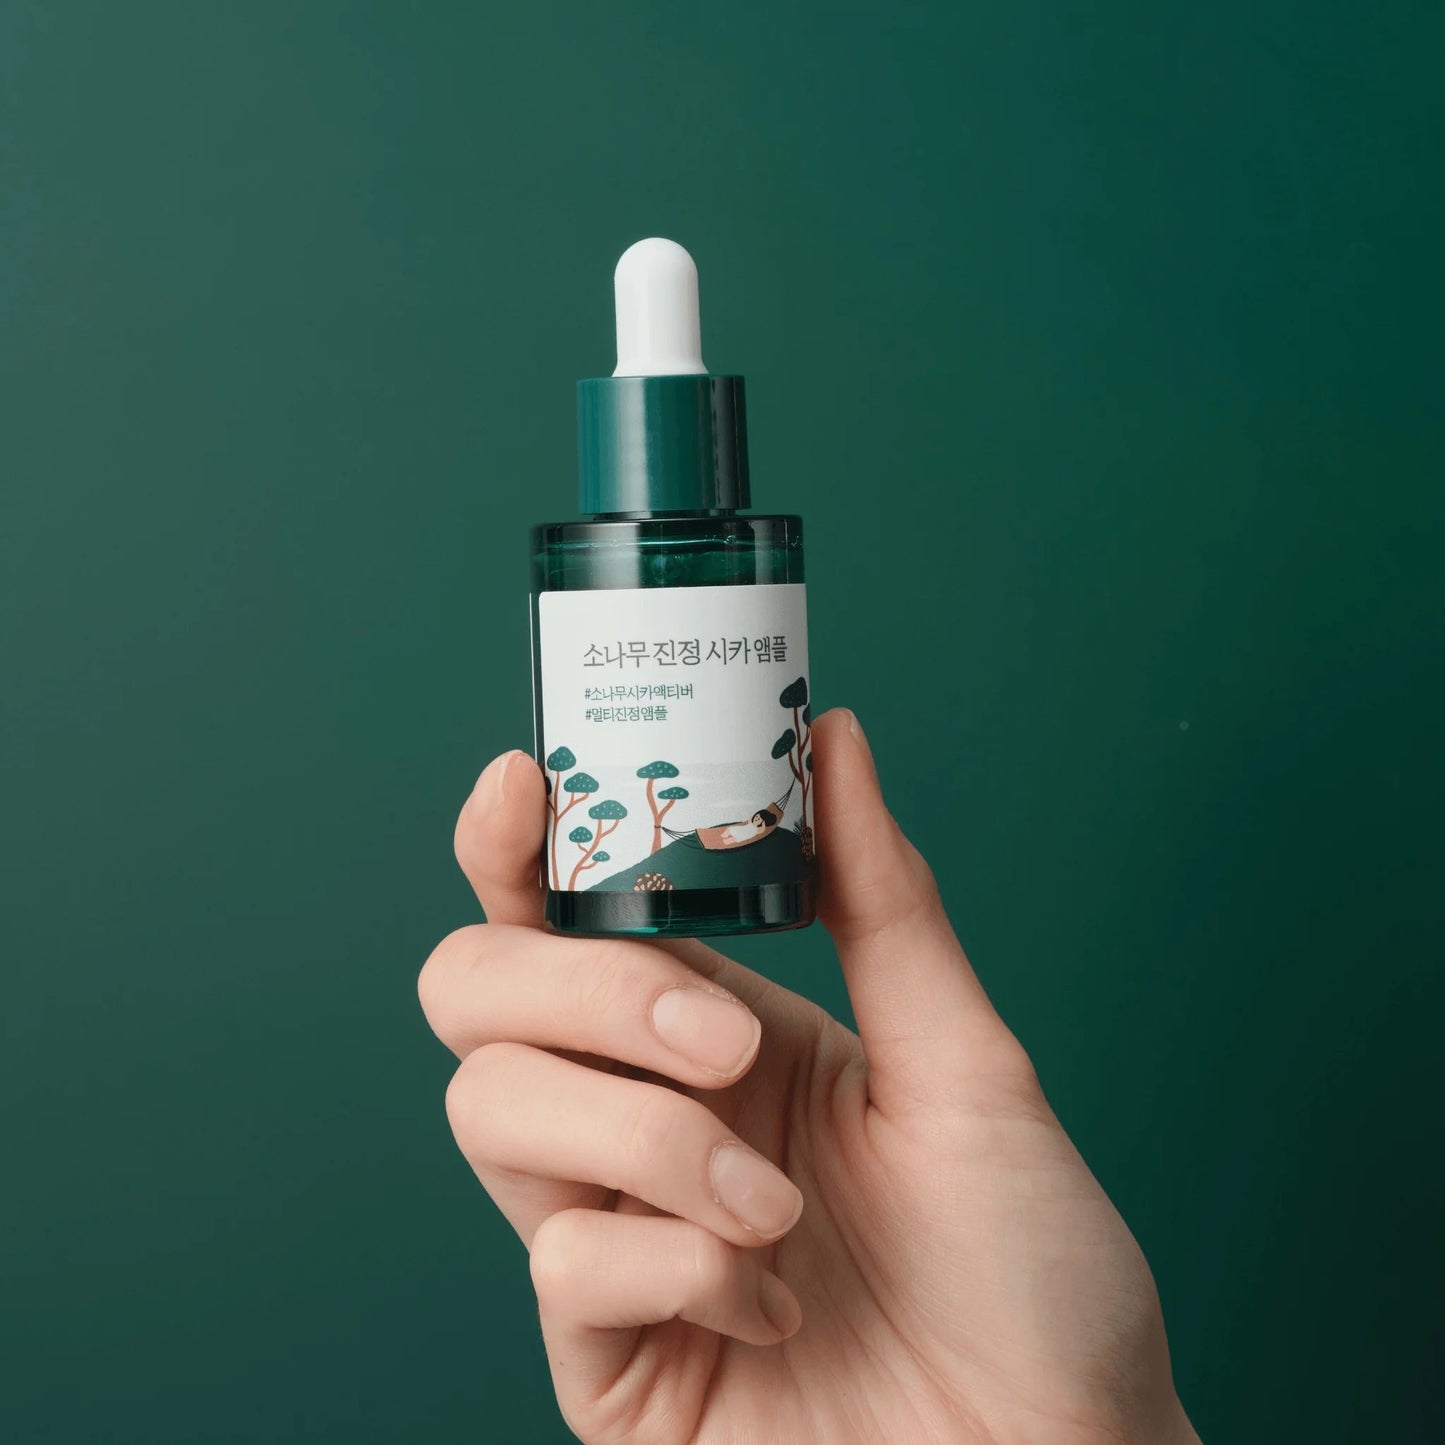 Round Labs Pine Tree Calming Cica Ampoule being held by a hand on dark green background